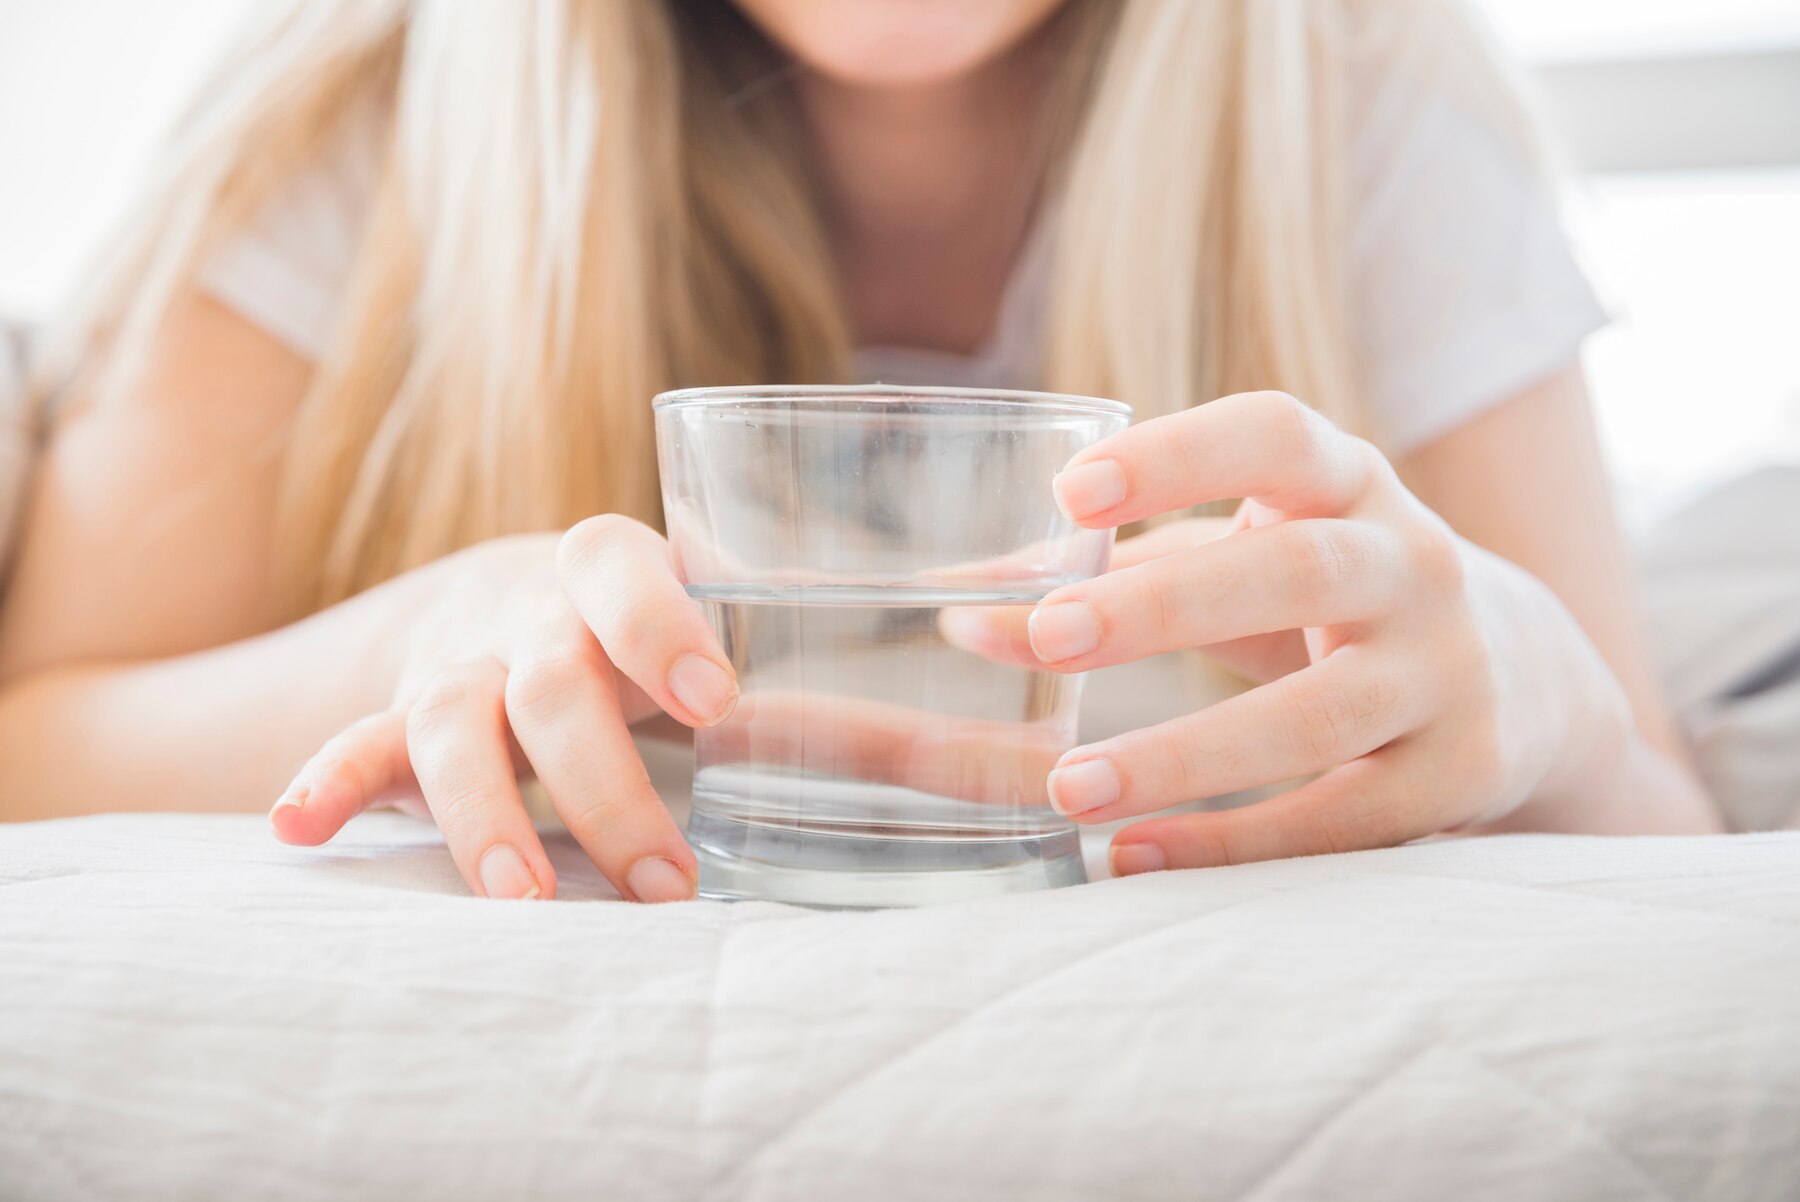 blonde-girl-holding-glass-of-water-on-the-bed_23-2148113498 (1).jpg